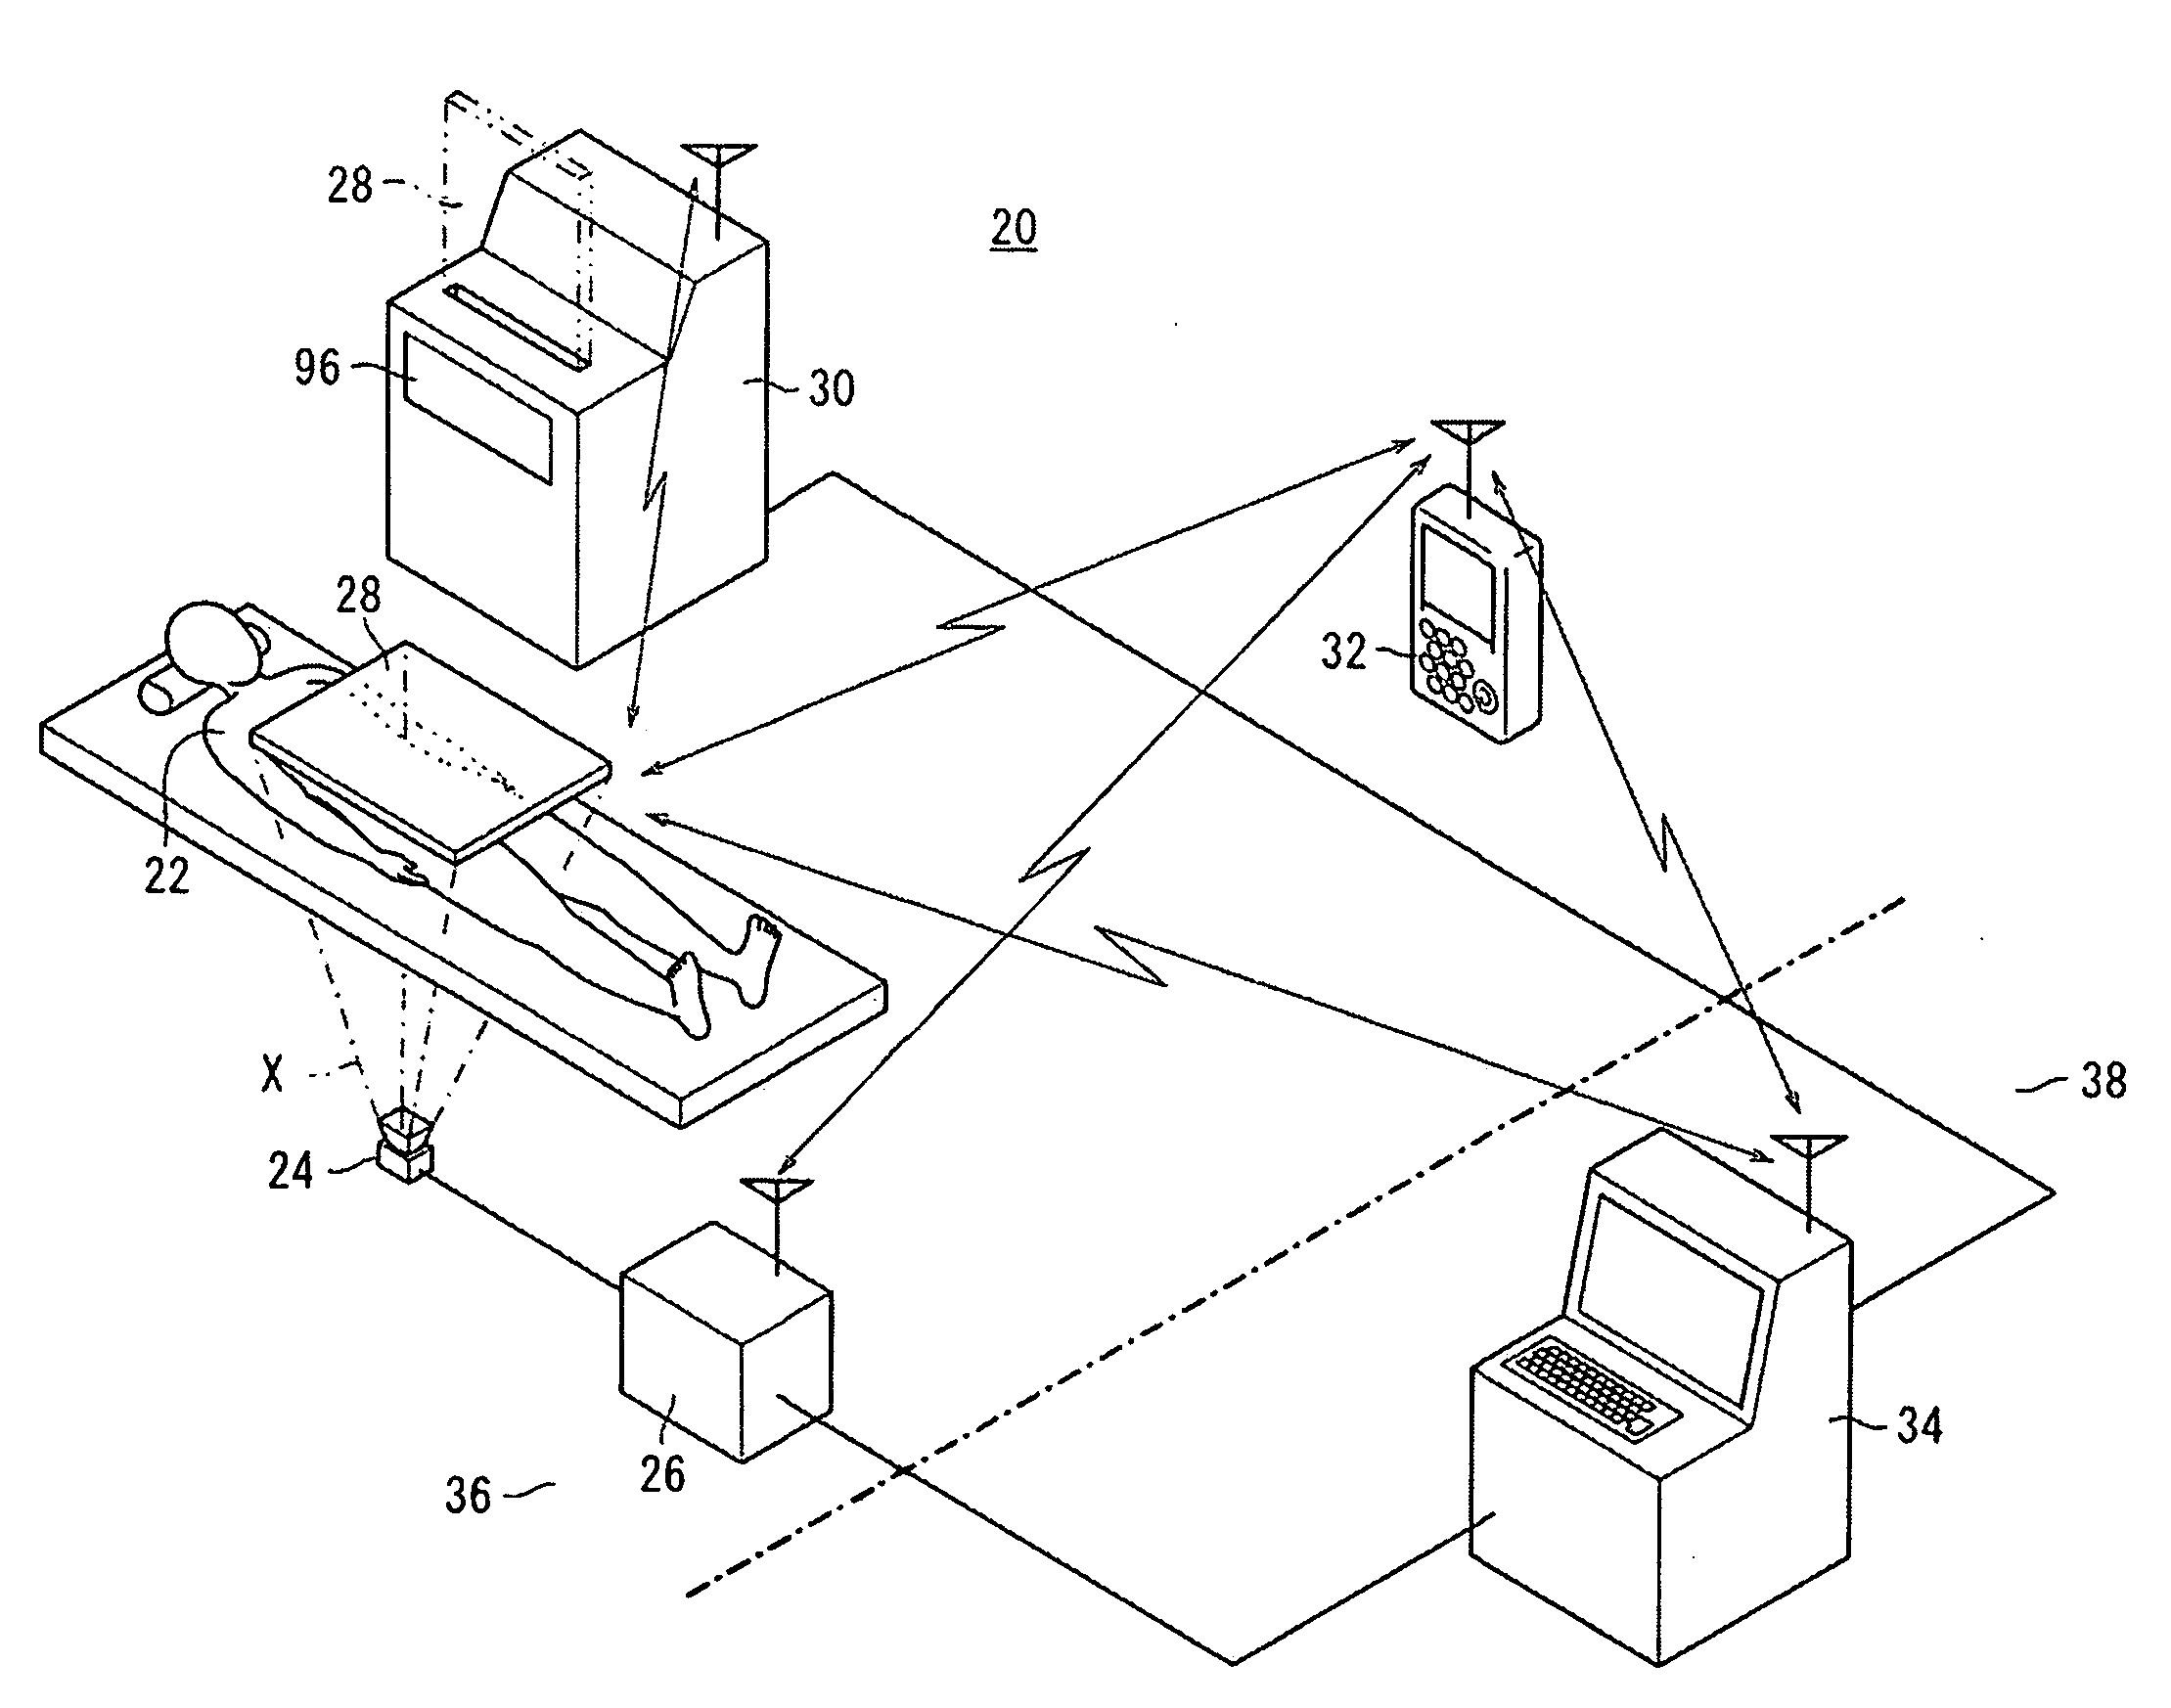 Radiation detection apparatus and radiation image capturing system